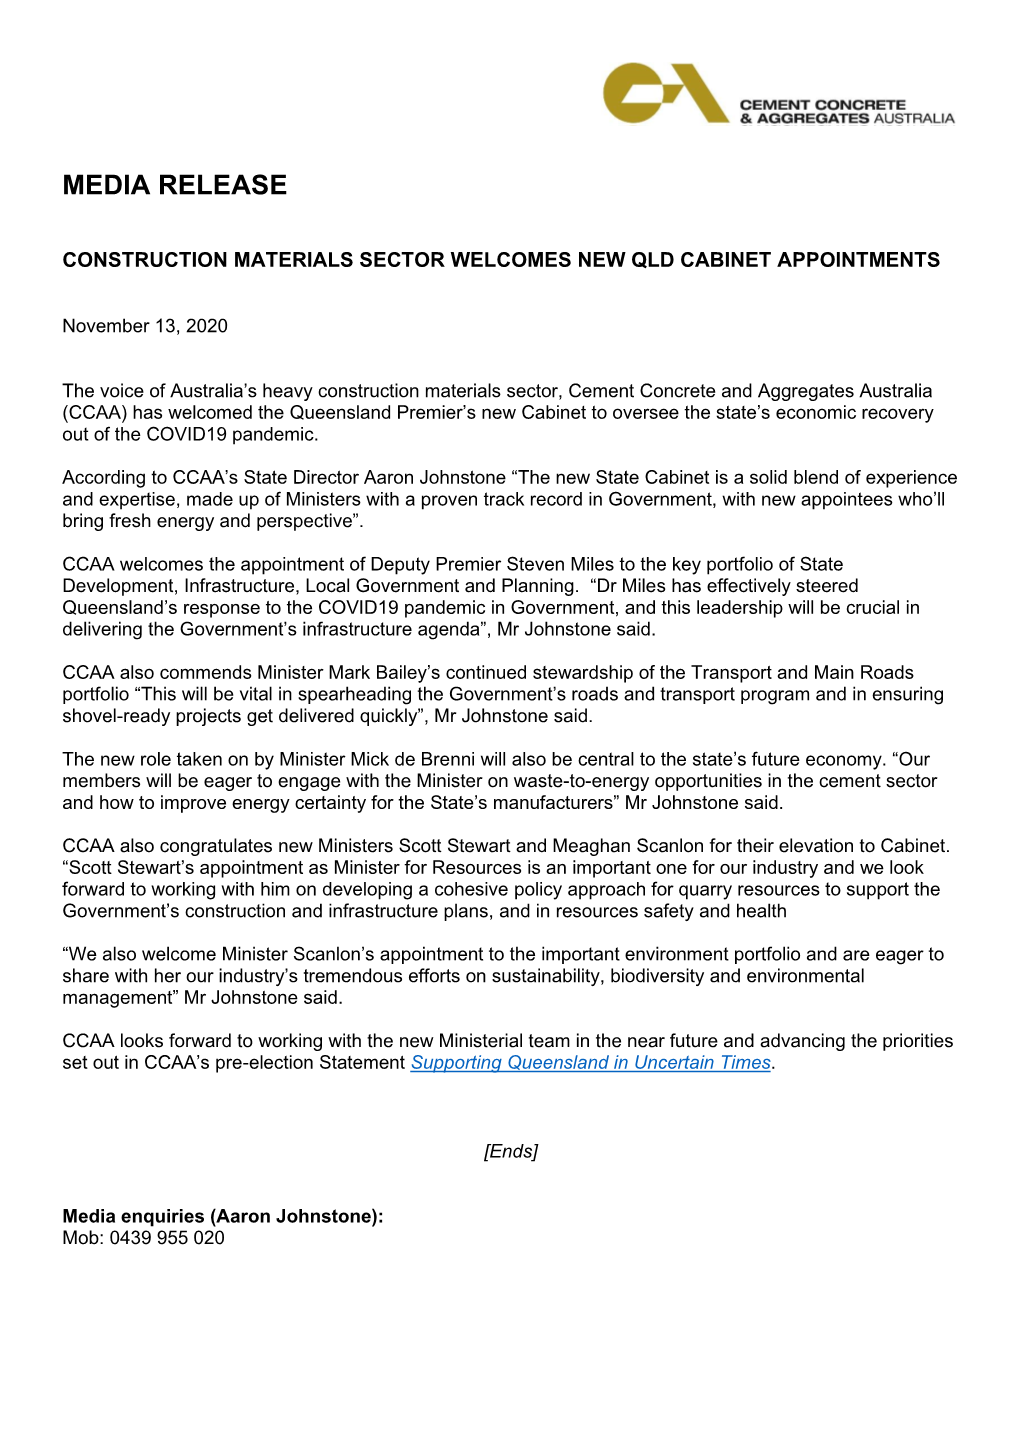 Construction Materials Sector Welcomes New Qld Cabinet Appointments